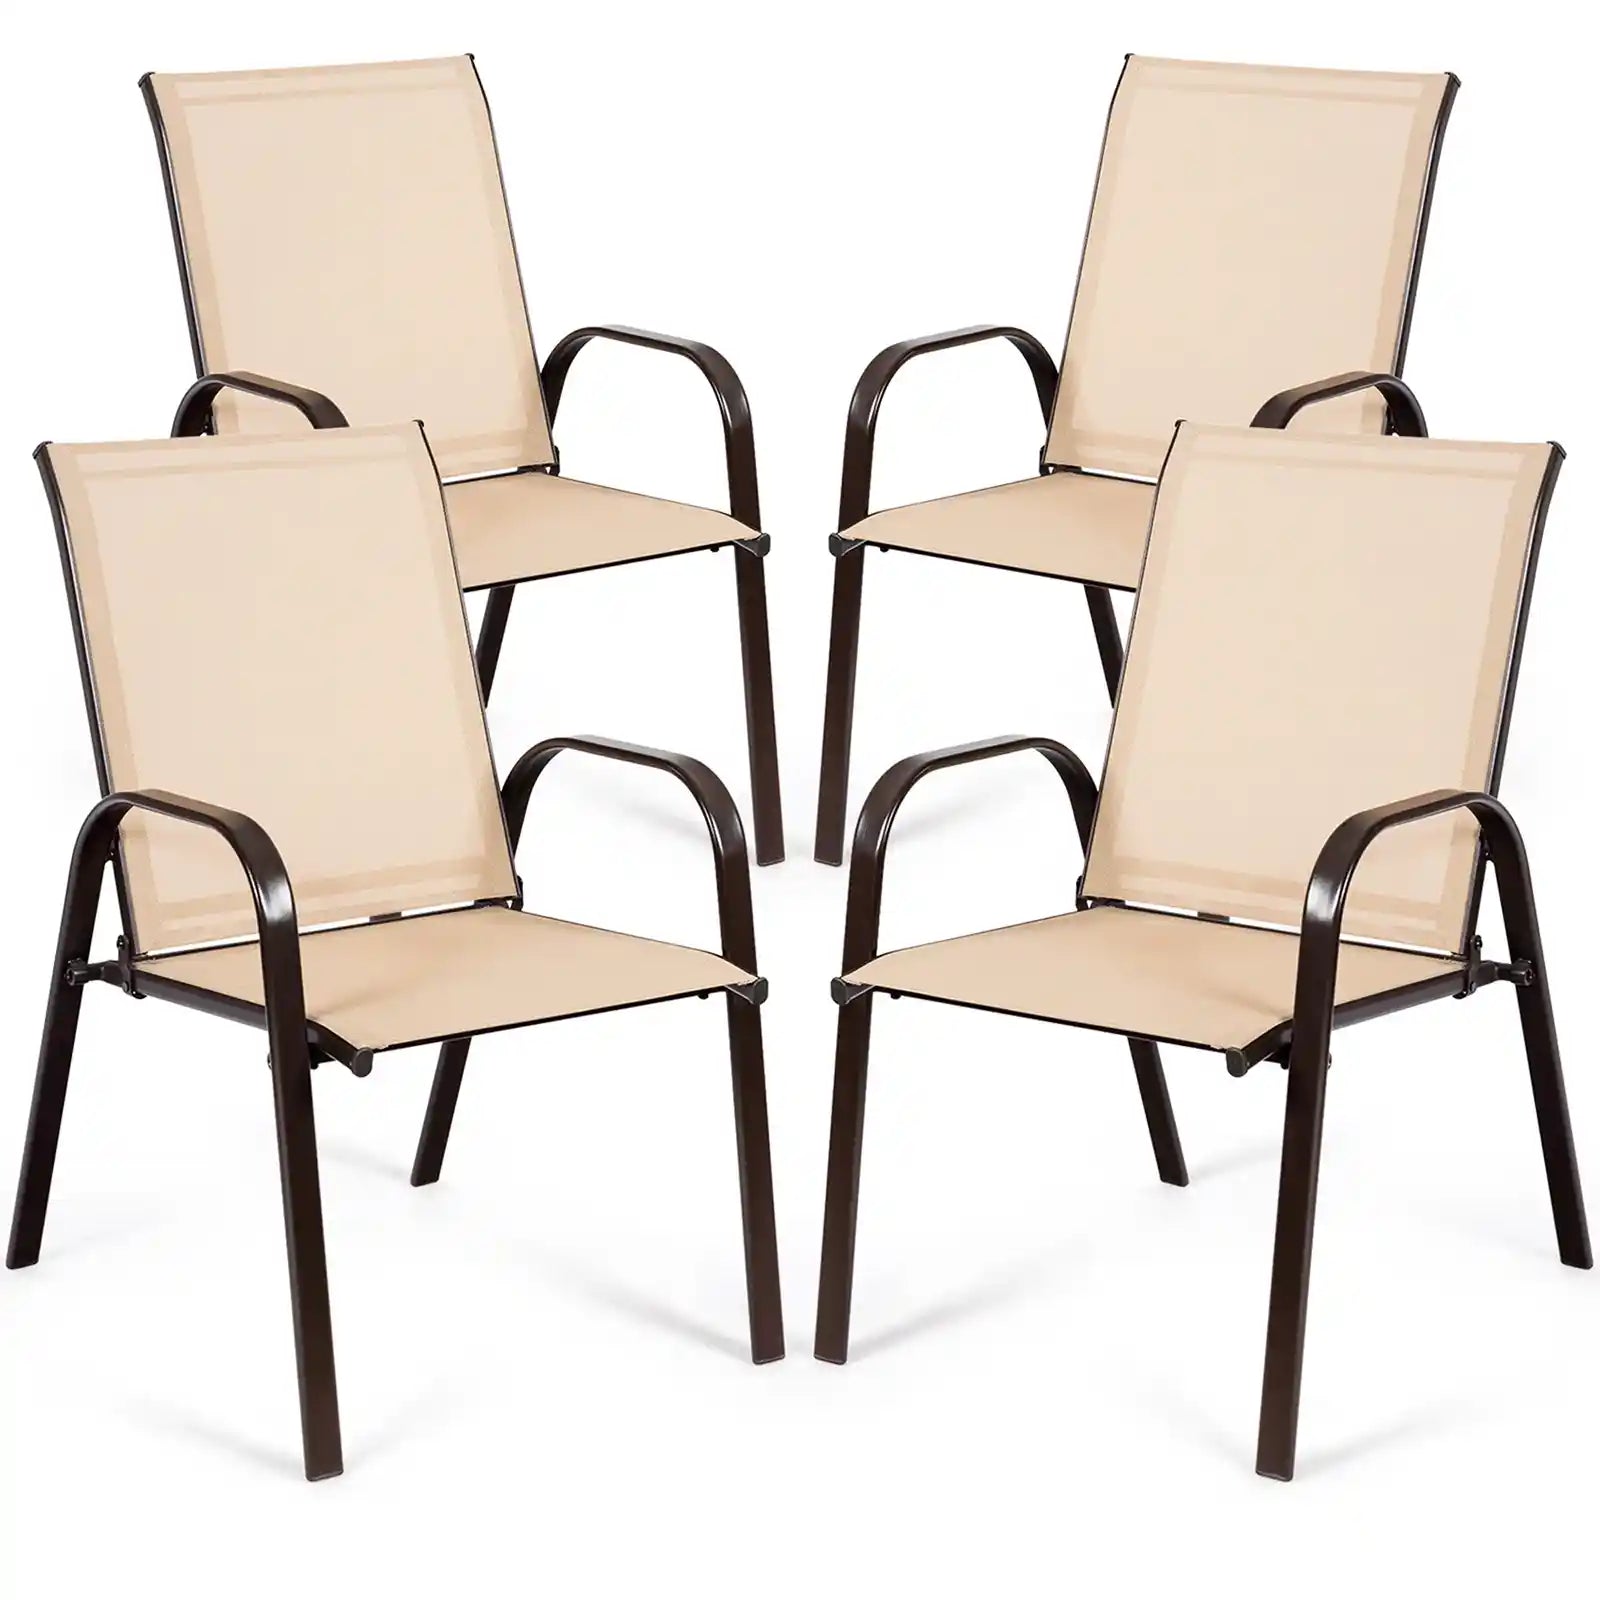 4 Patio Chairs Dining Chairs w/ Steel Frame Yard Outdoor